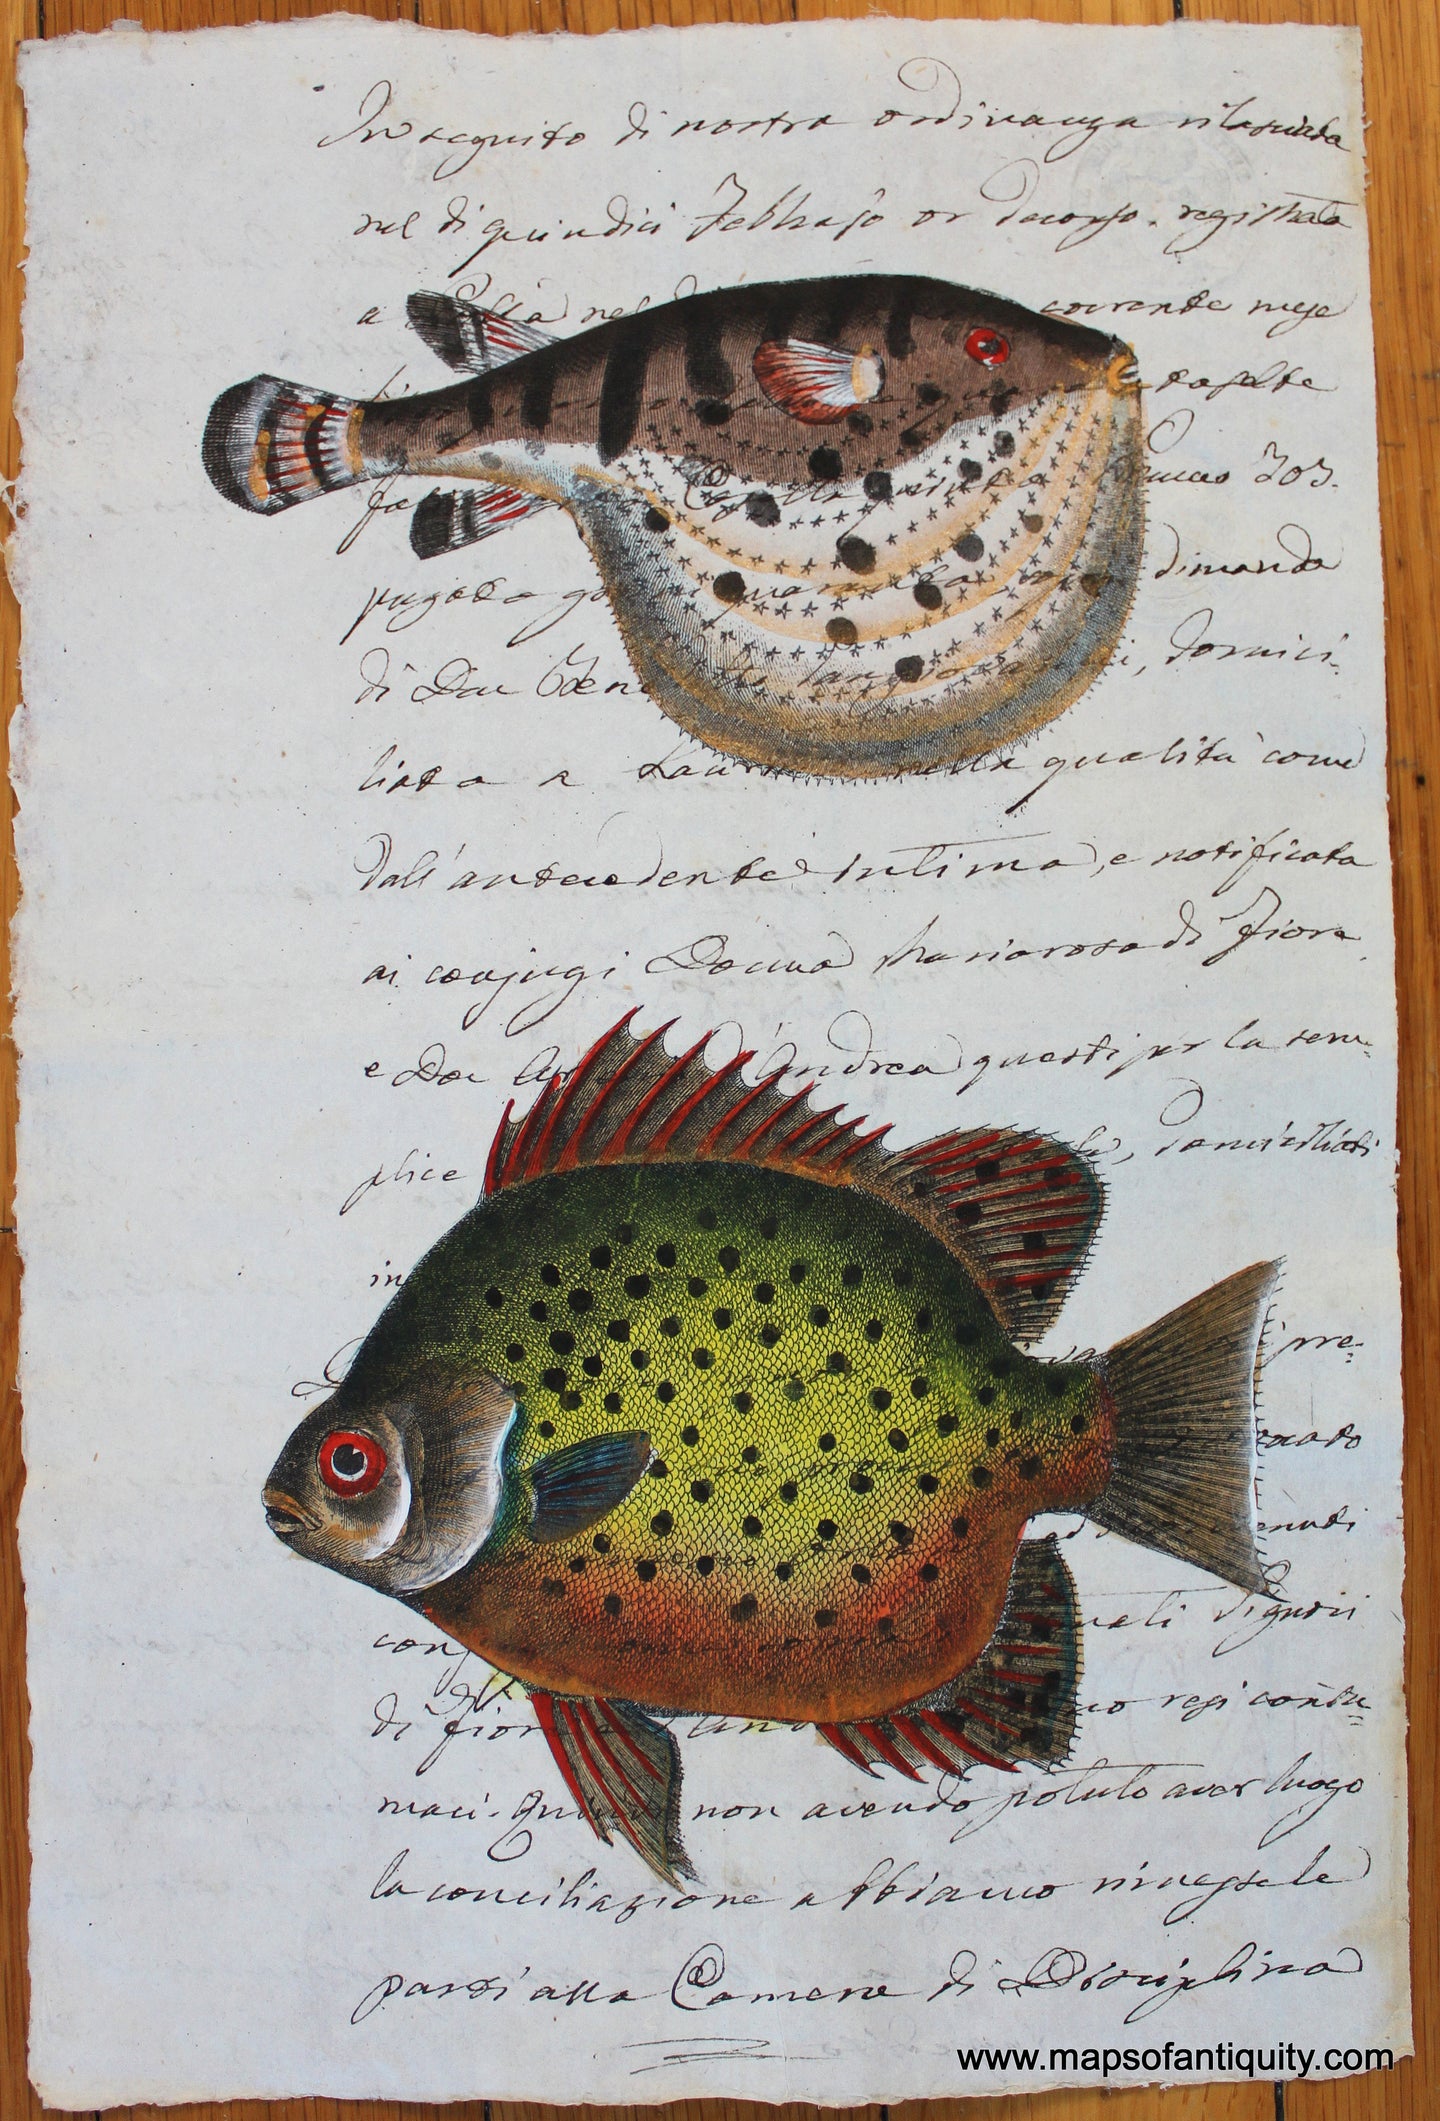 Digitally-Engraved-Specialty-Reproduction-Fish---Reproduction-on-Antique-Paper-Digitally-Engraved-Specialty-Reproductions----Maps-Of-Antiquity-1800s-19th-century